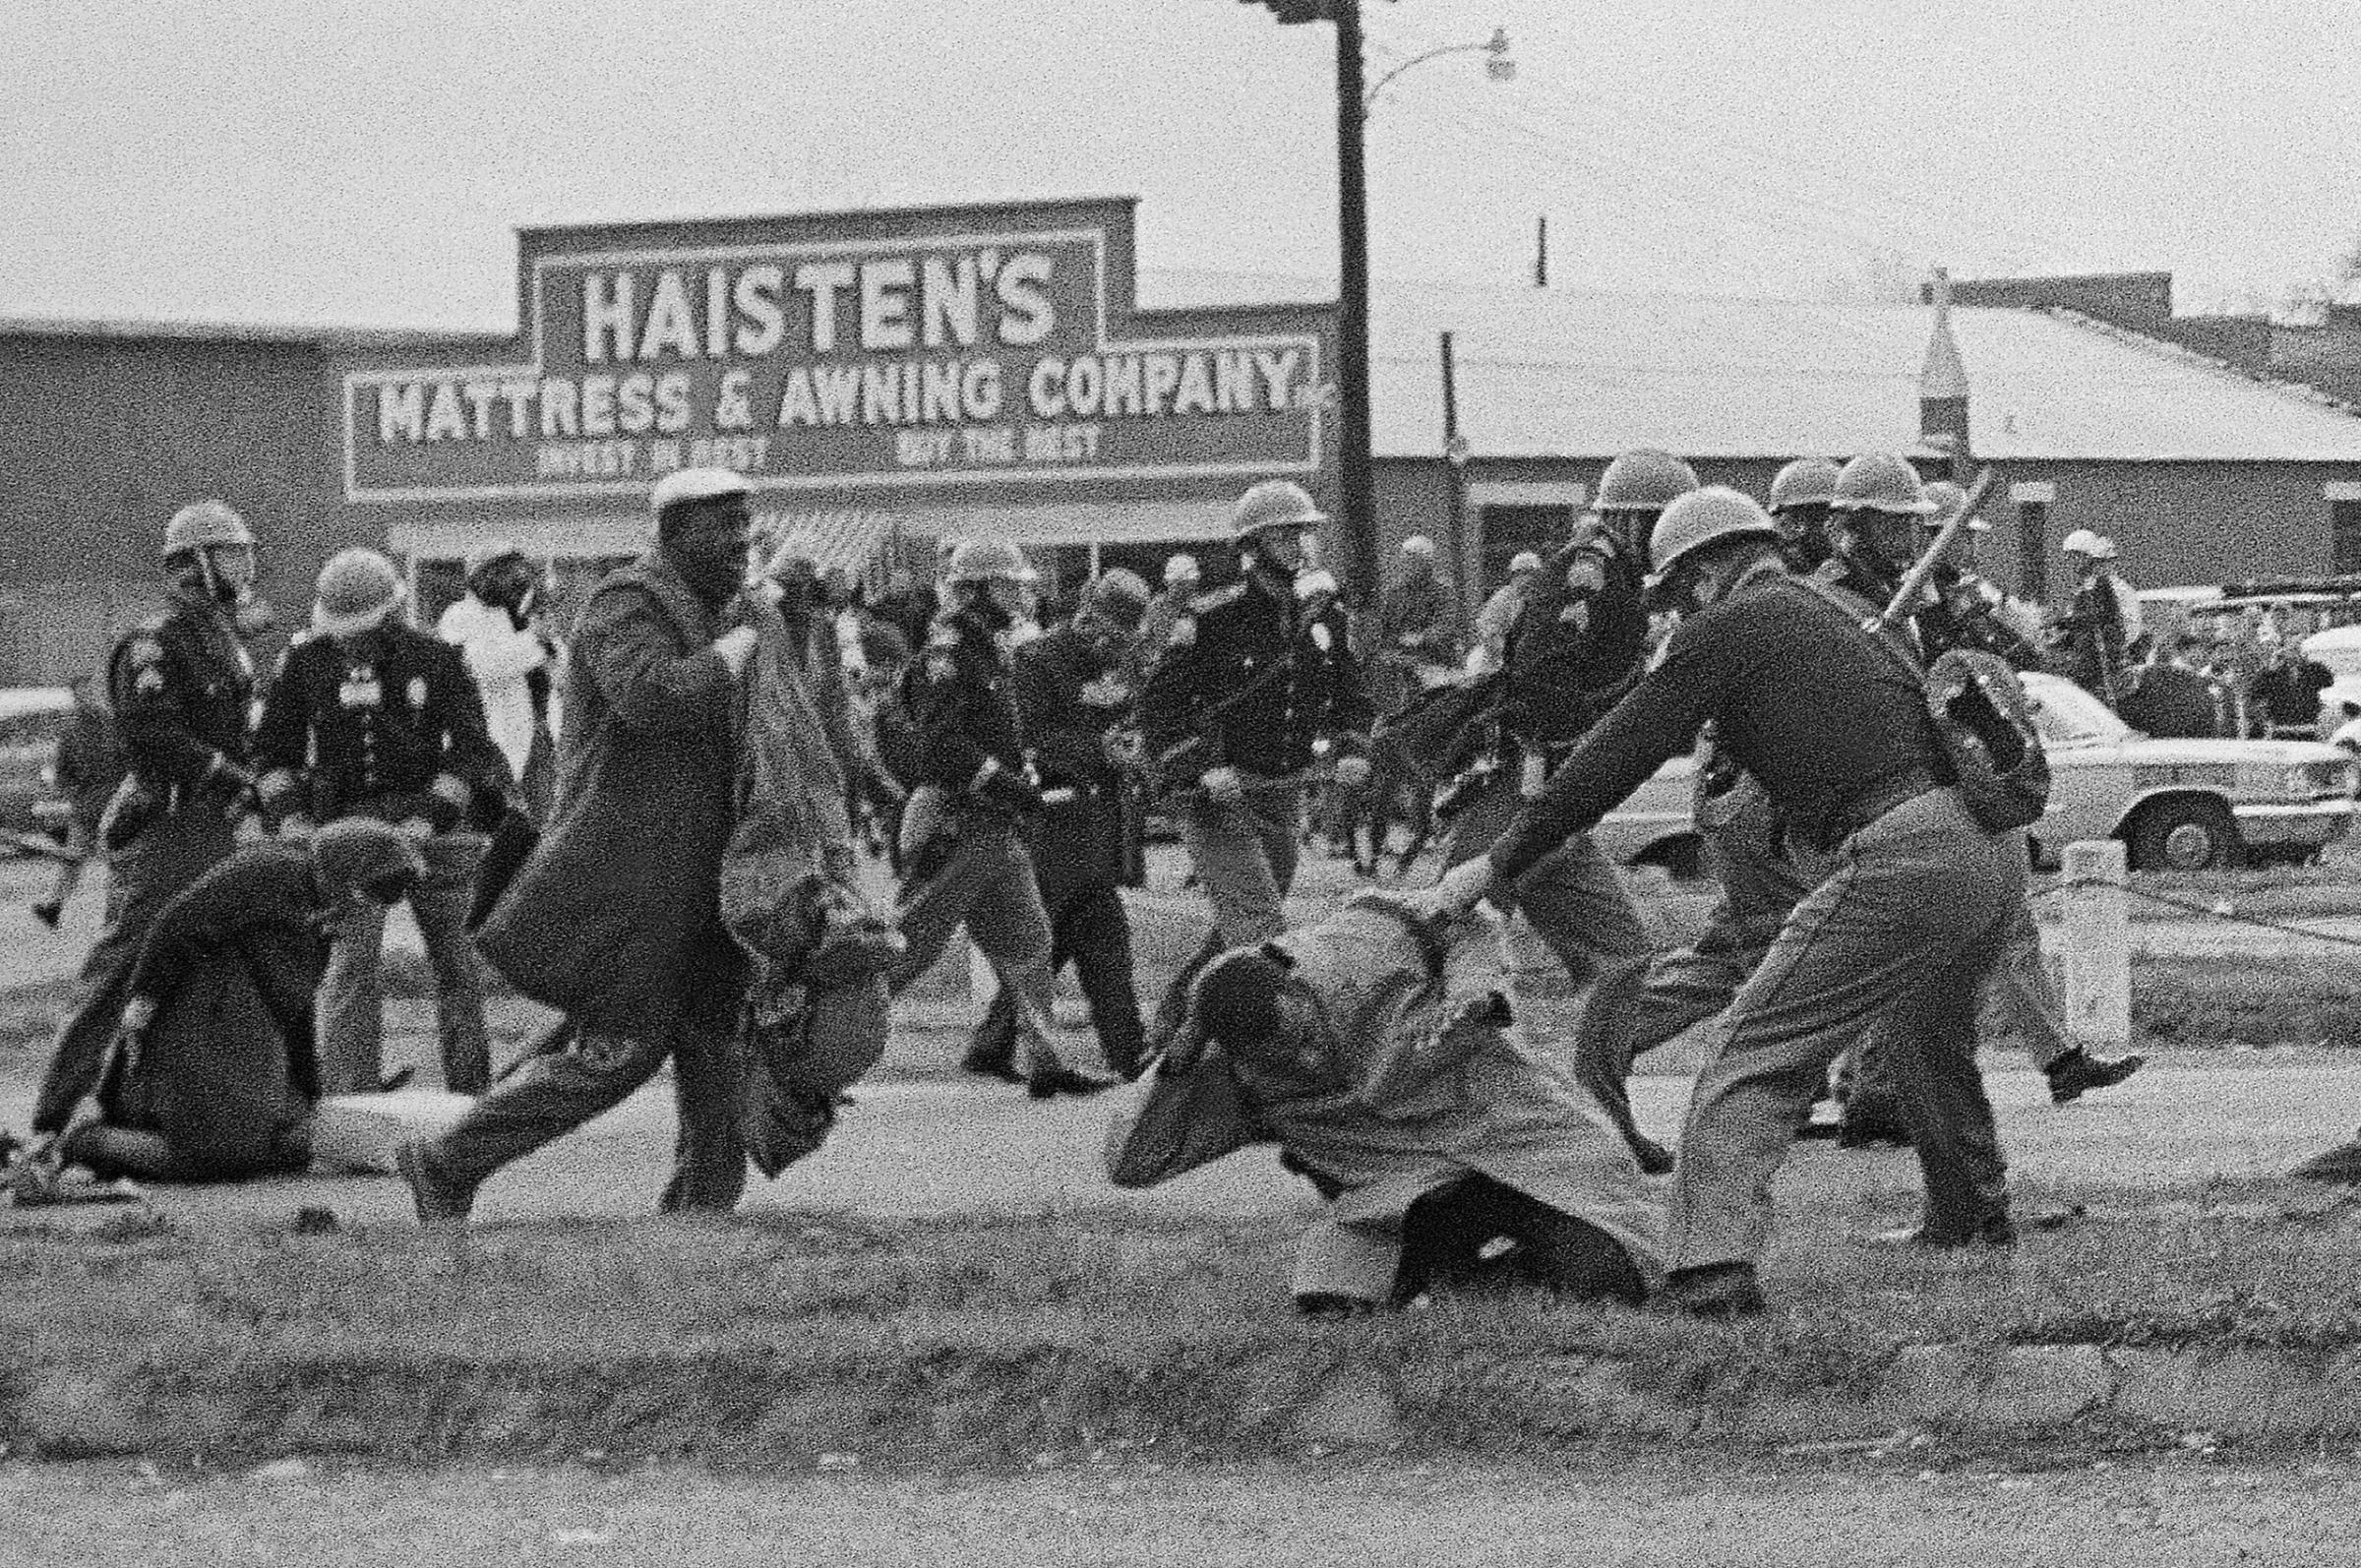 John Lewis beaten by state troopers on Bloody Sunday in Selma, Ala, 1965.